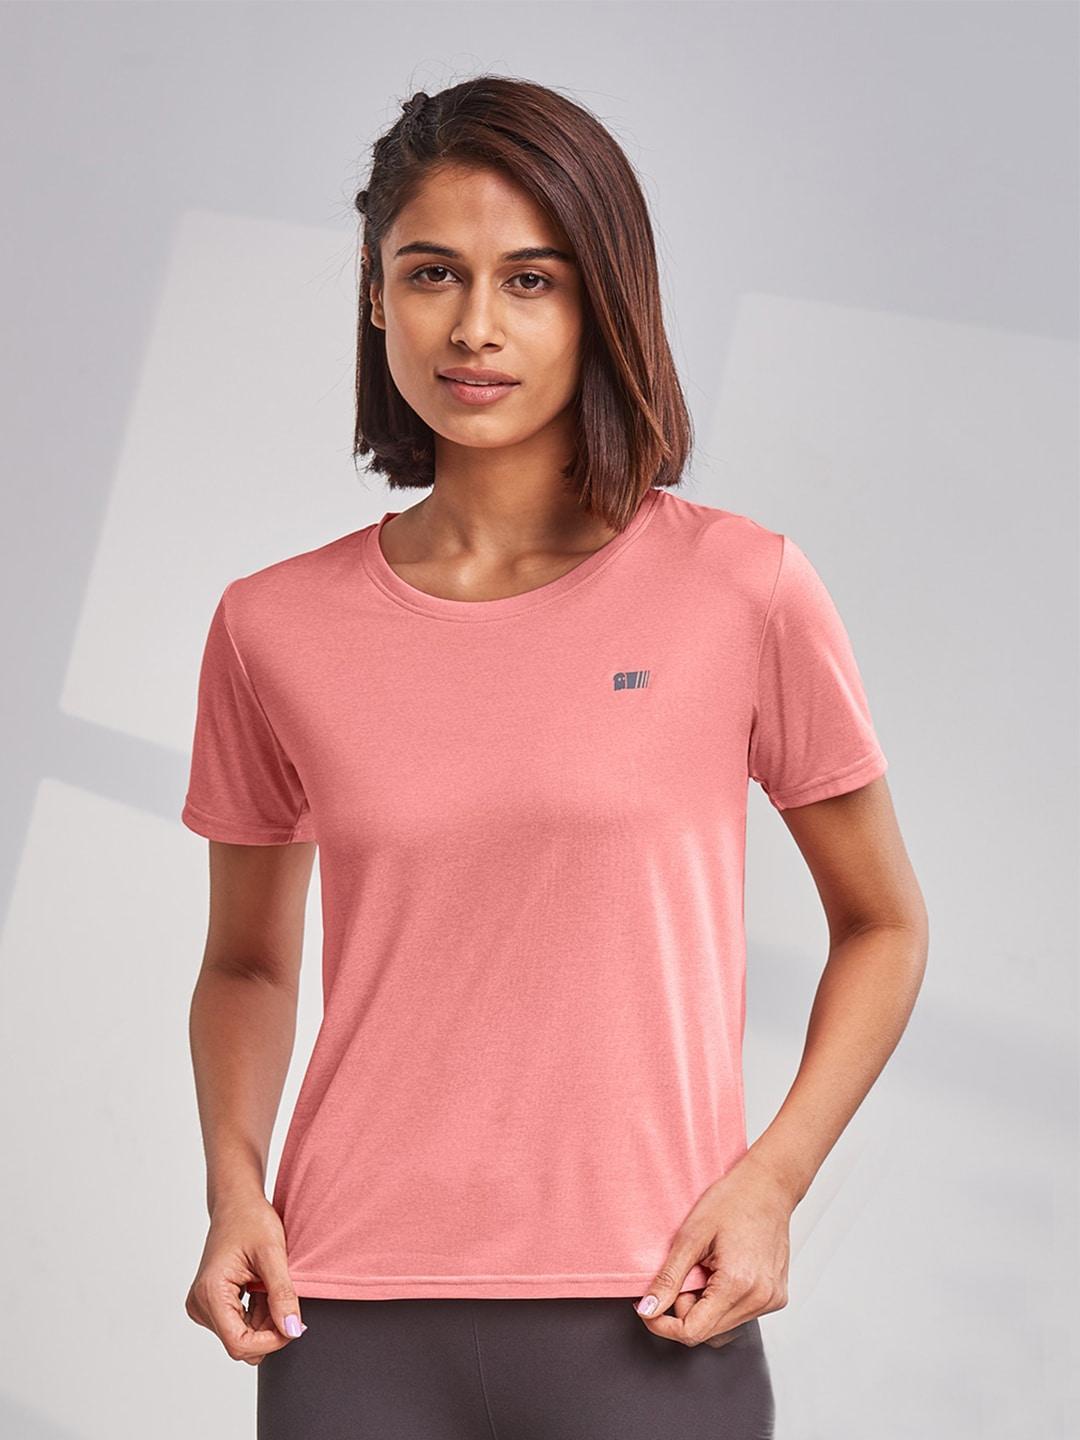 the souled store women pink t-shirt